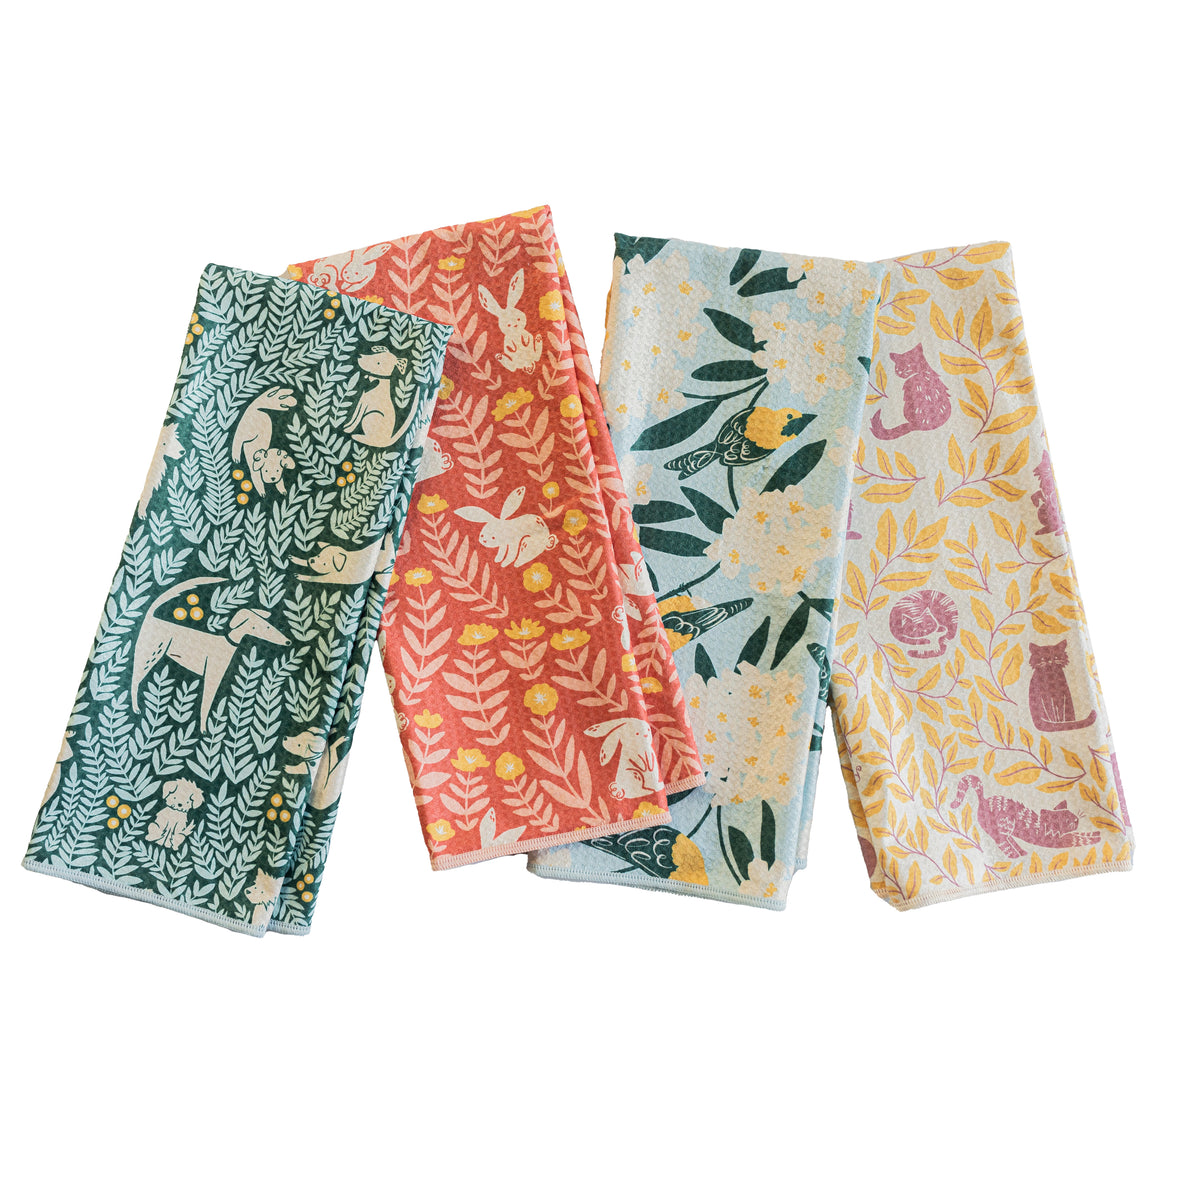 Assorted Anywhere Towel - Nuthatch Little Friends Kitchen Towels Once Again Home Co.   